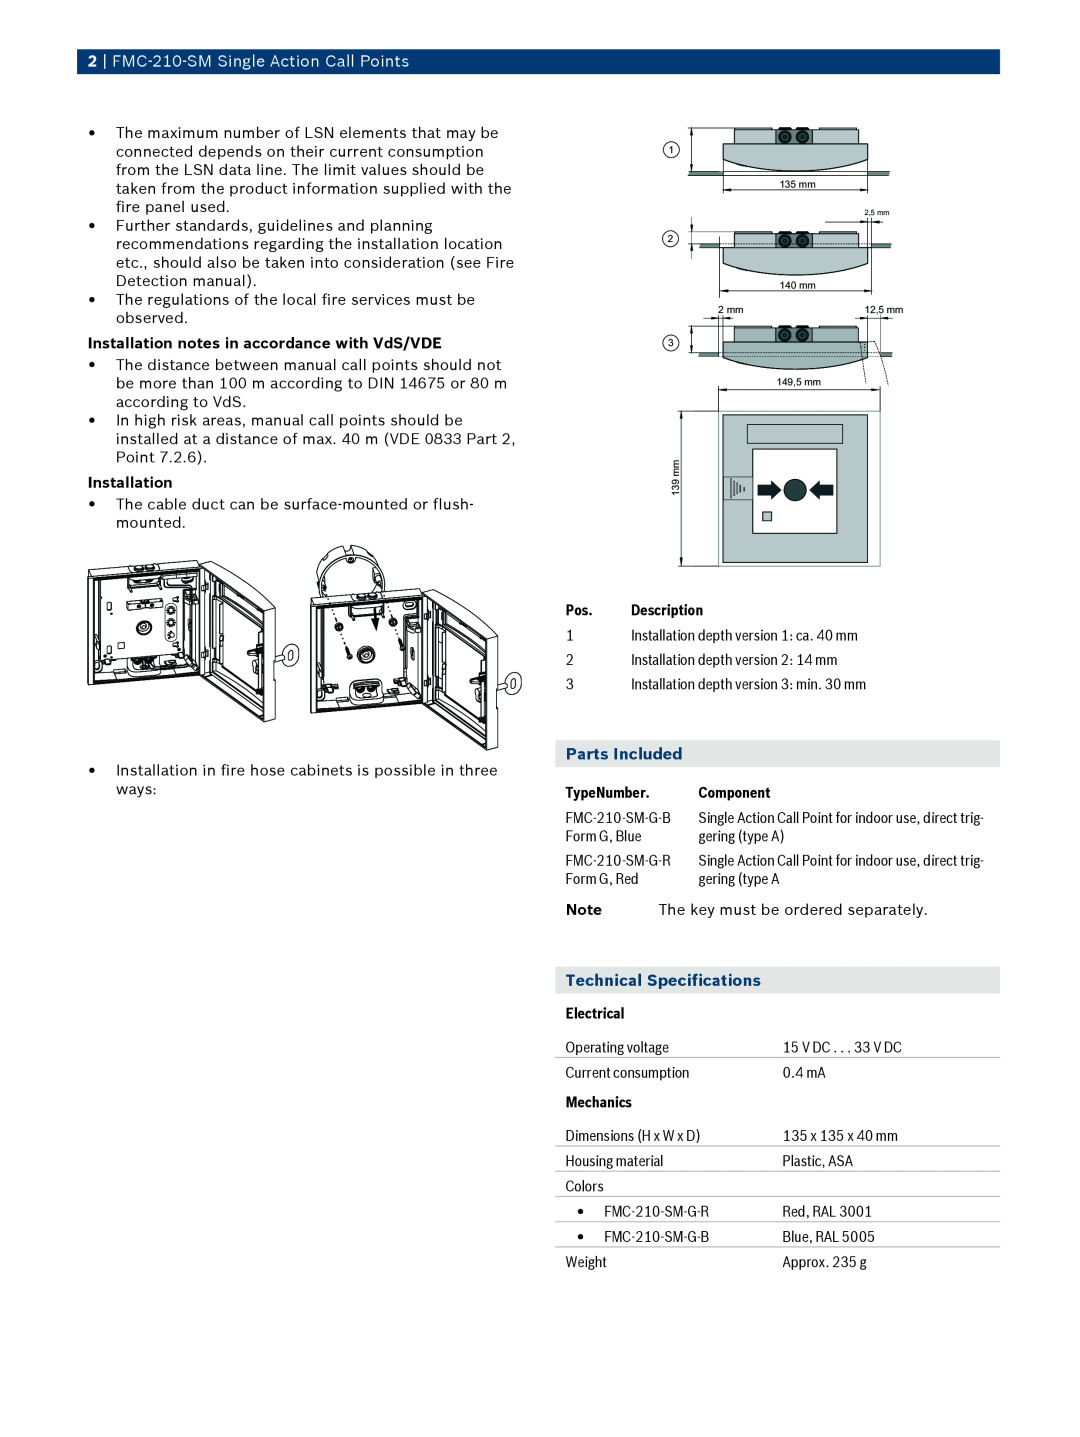 Bosch Appliances FMC210SM manual FMC‑210‑SM Single Action Call Points, Parts Included, Technical Specifications 